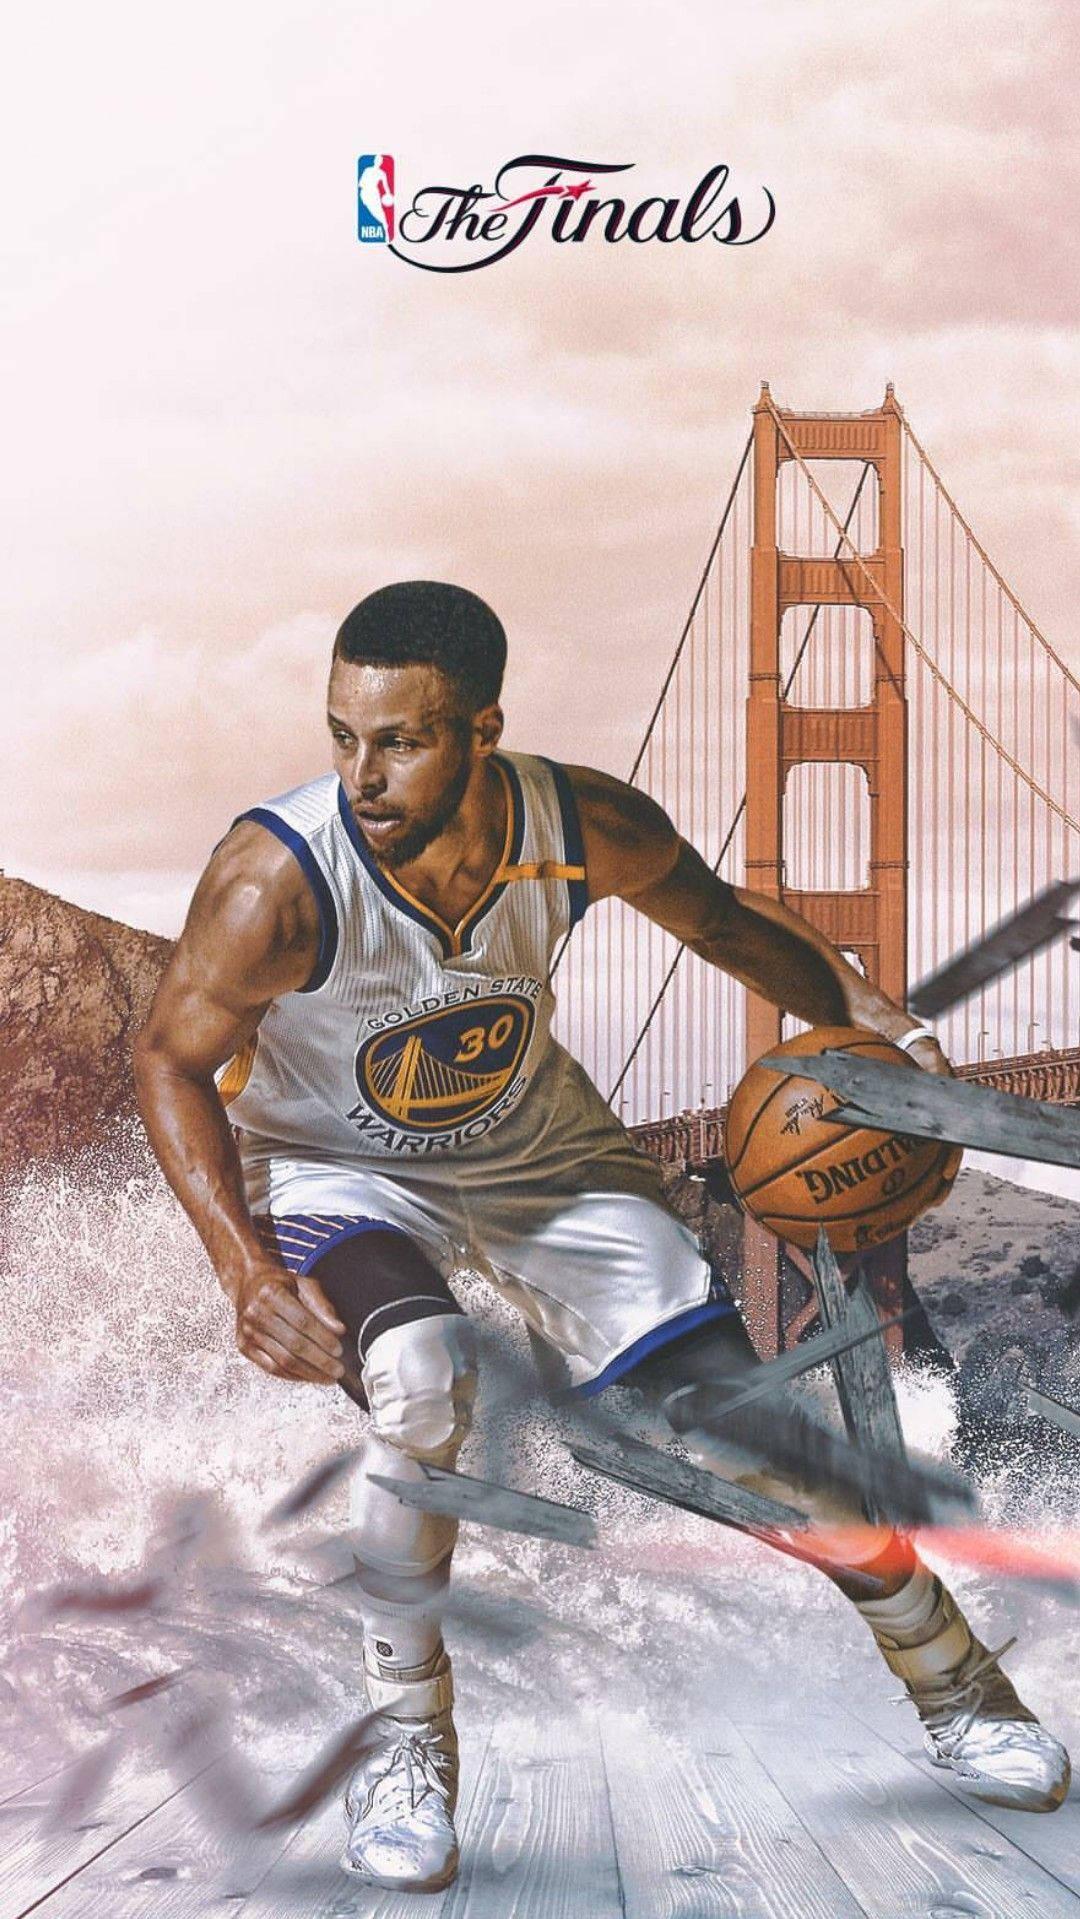 Download NBA iPhone Steph Curry Golden State Warriors Wallpaper